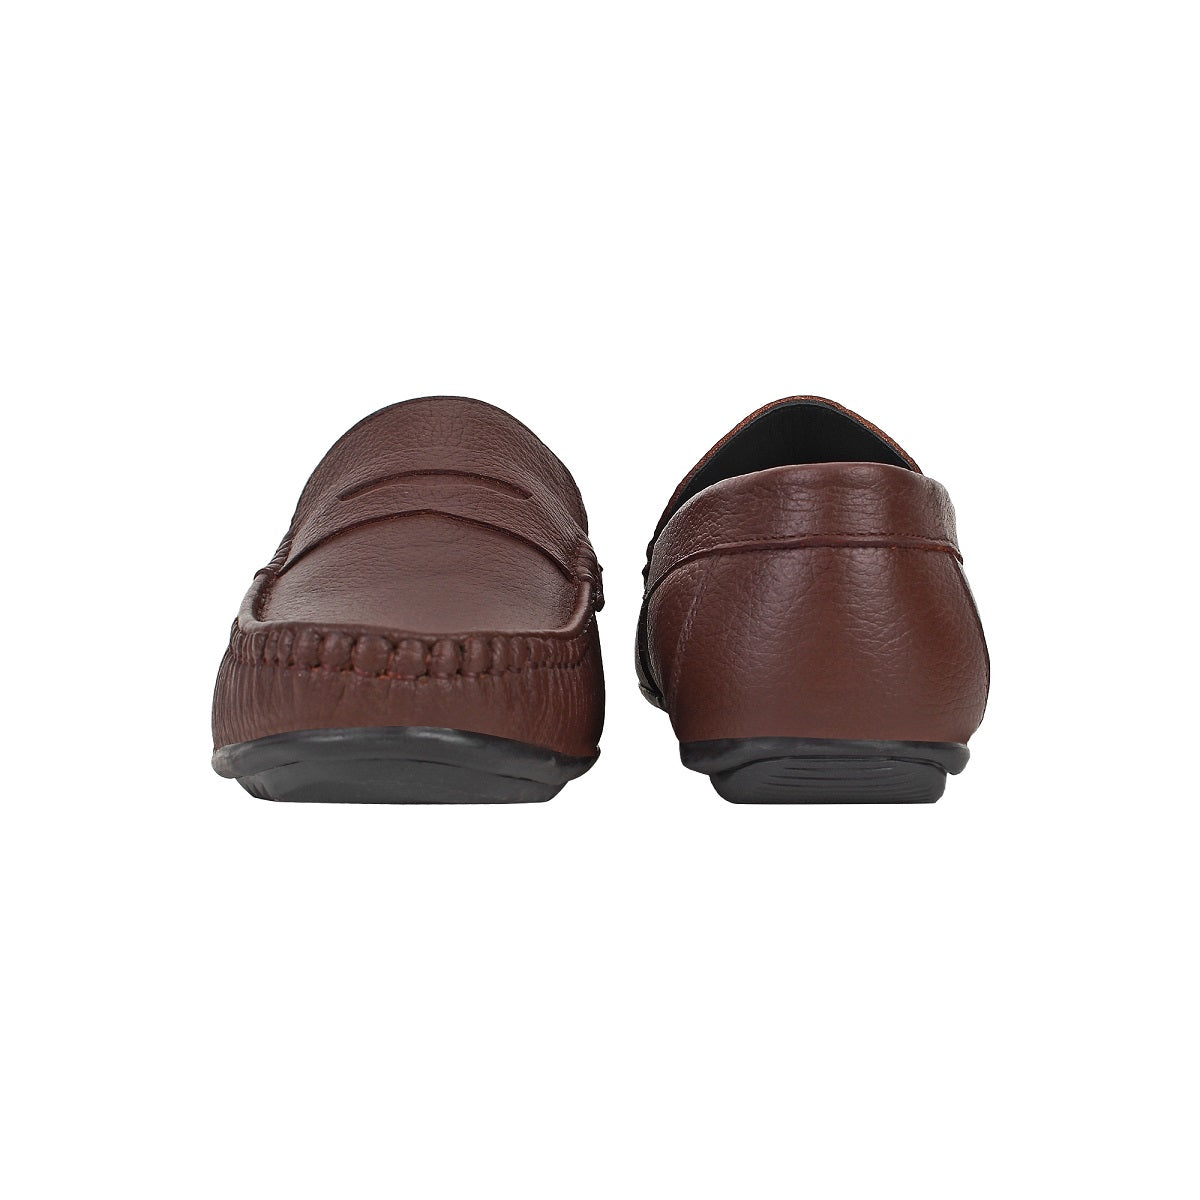 Brown Leather Loafers for Men - Defective